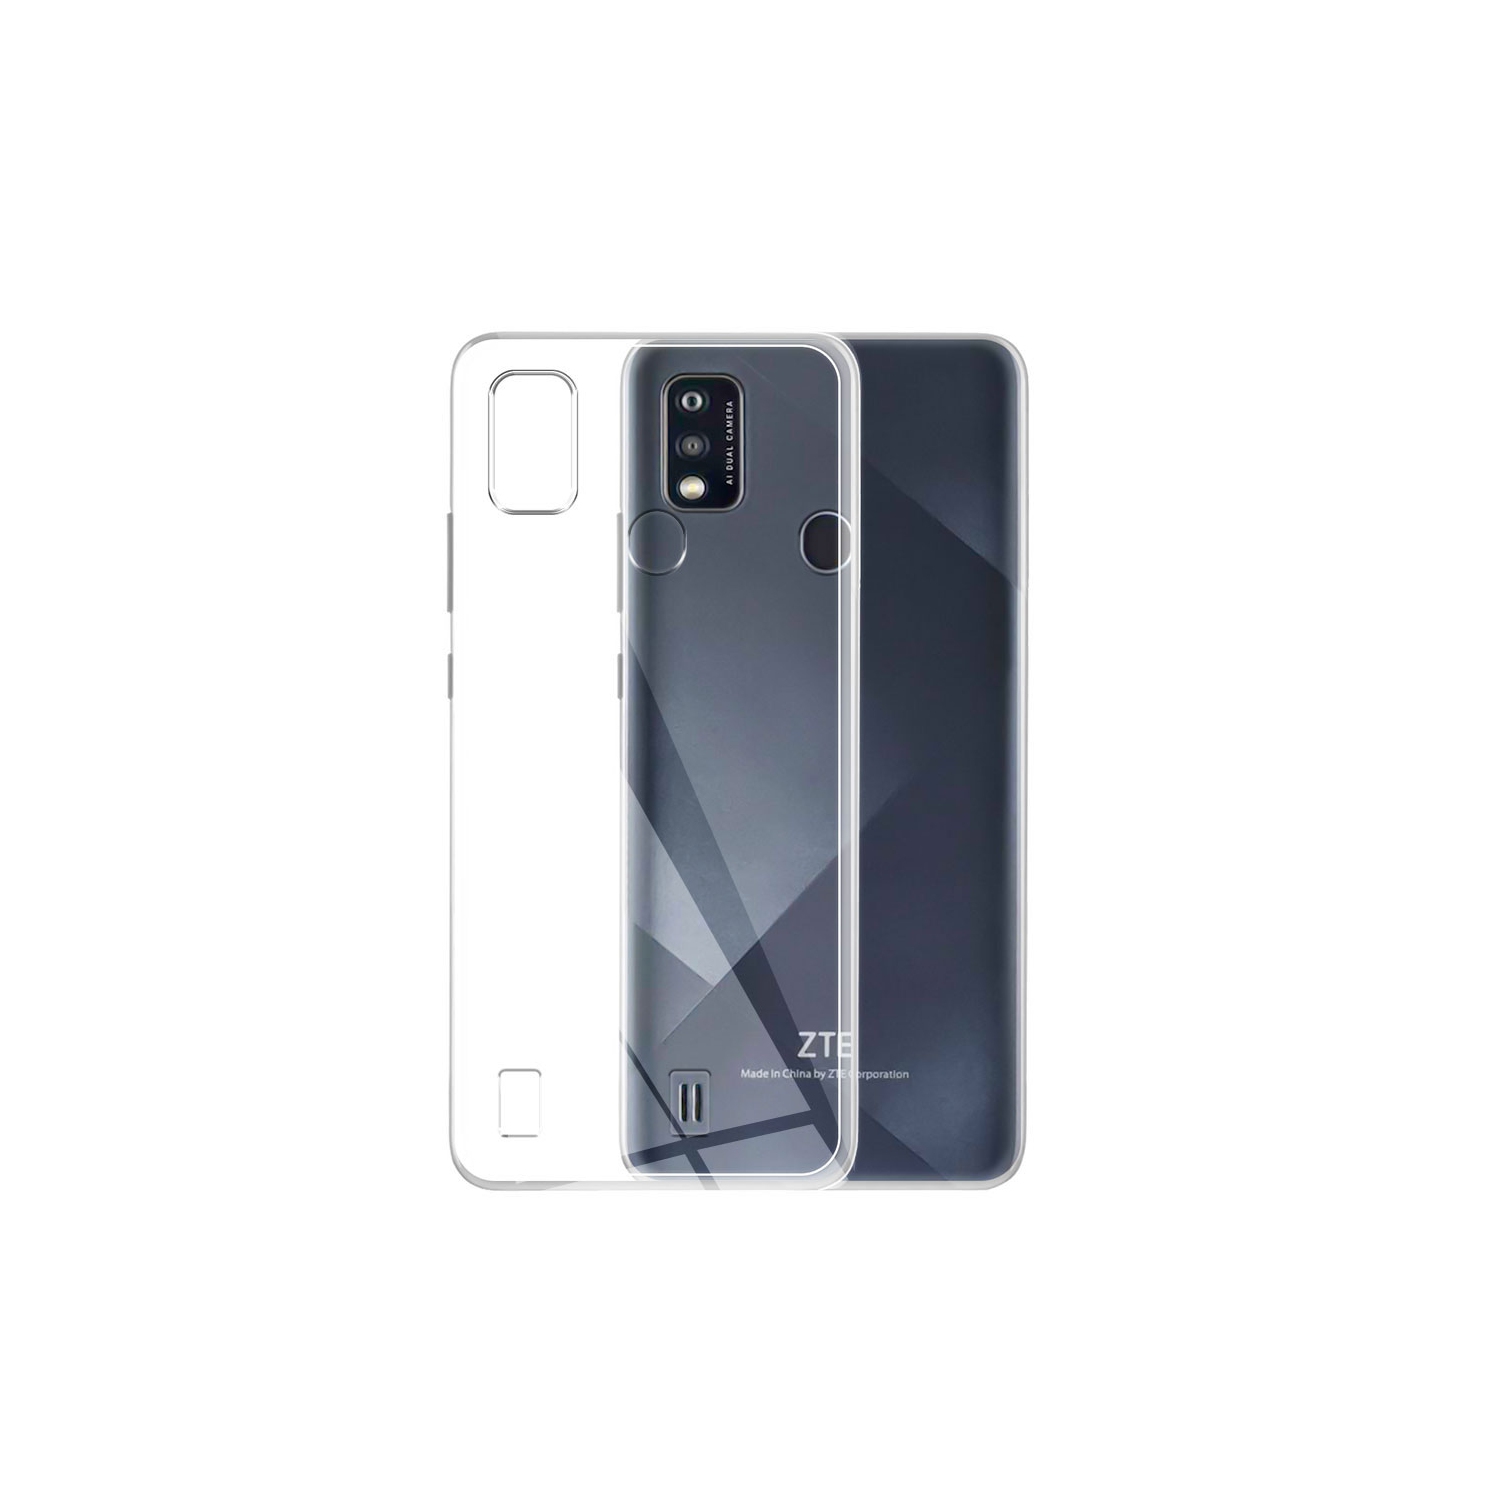 XCRS Slim Shockproof Crystal Acrylic Cover with Complete overall Protection, bumper and reinforced edges case for ZTE Blade A7P 6.5 inch